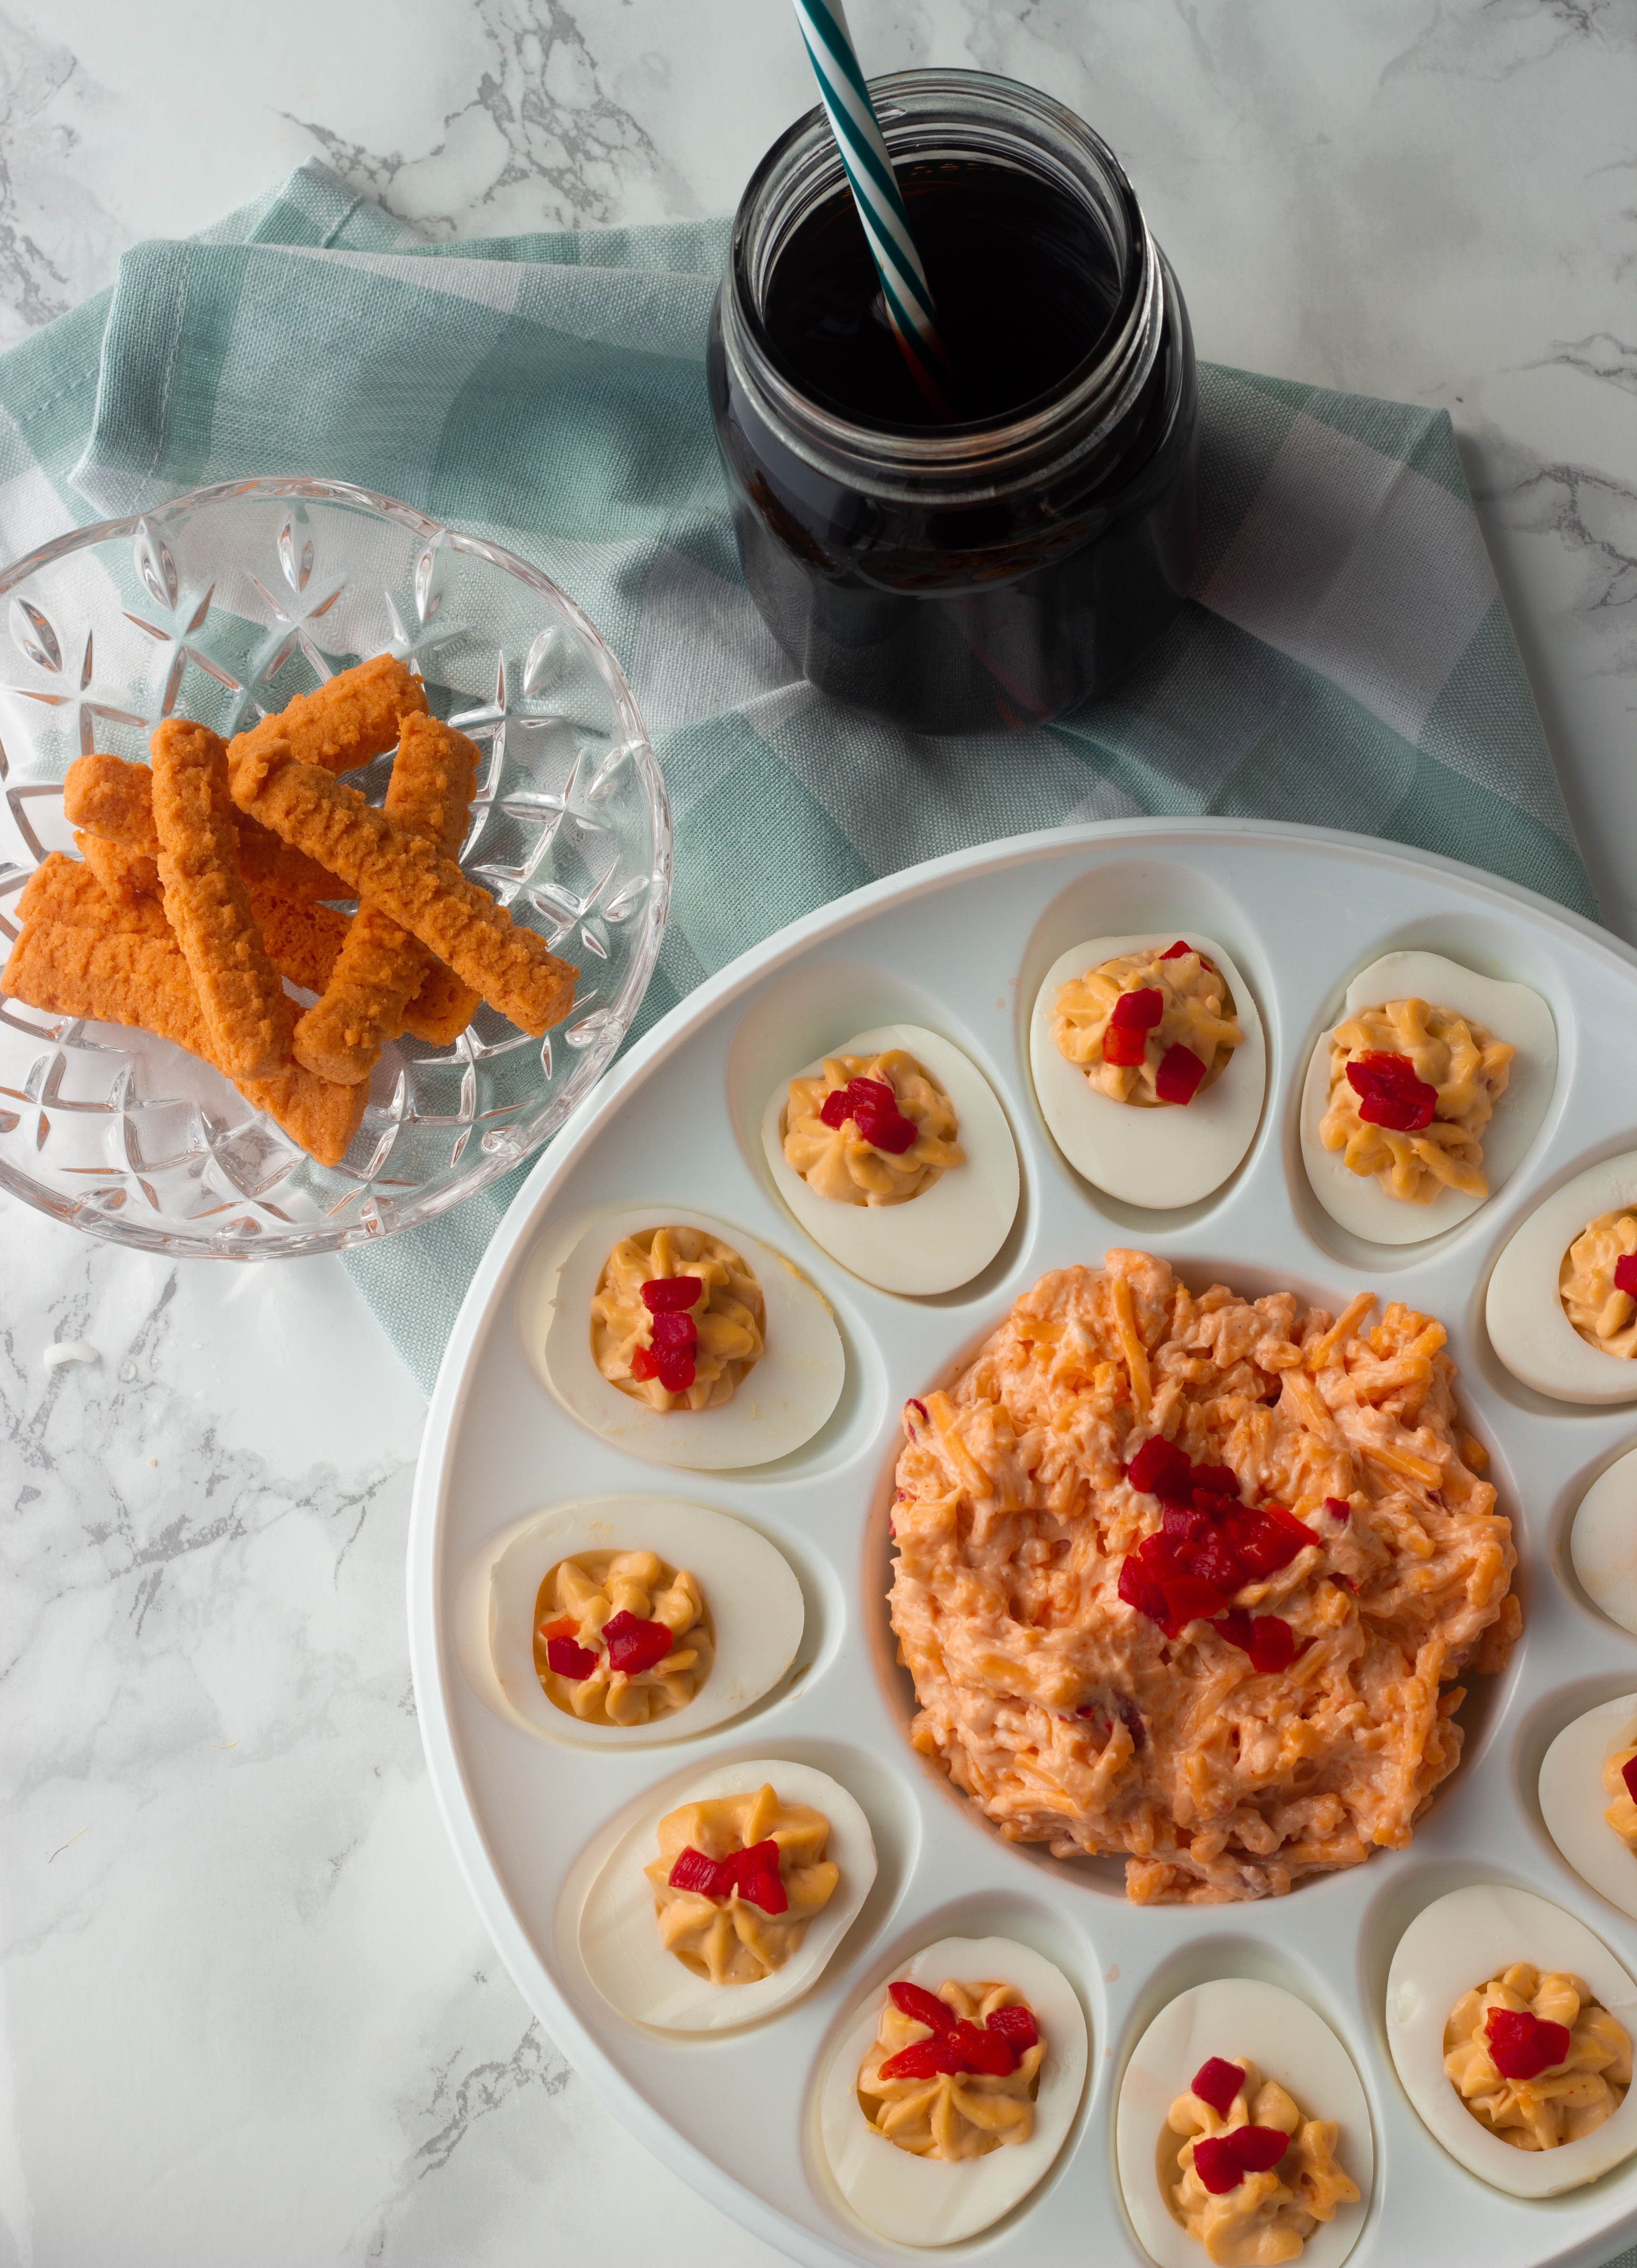 Classic deviled eggs give a nod to the South with these Pimento Cheese Deviled Eggs. A zero carb keto snack perfect for egg fasts or a Masters viewing party!